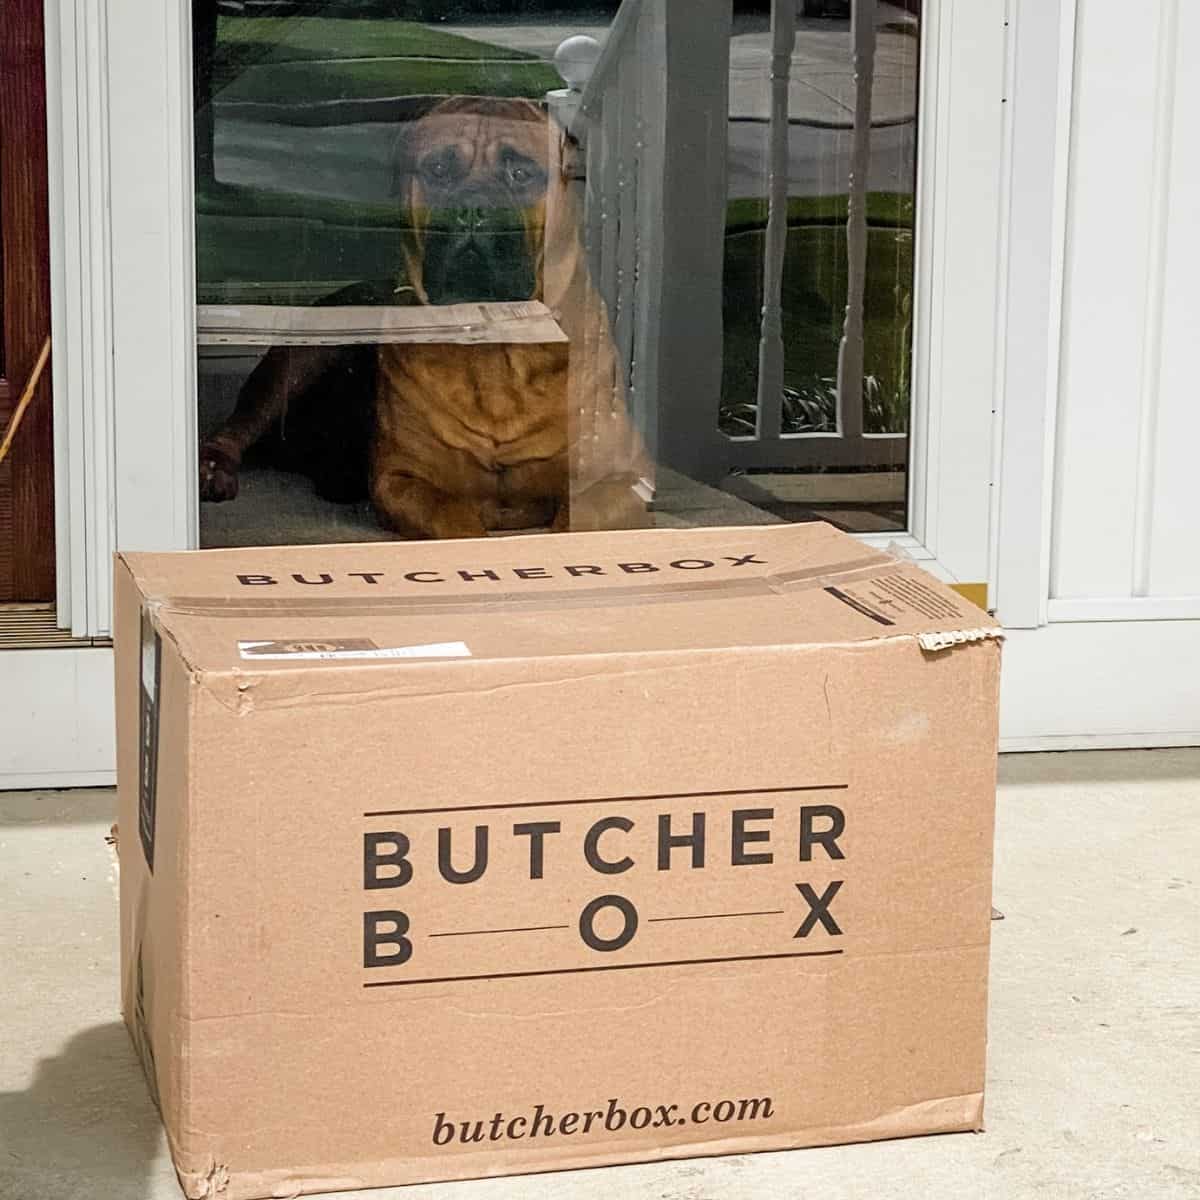 Hand's on Review: My Experience With ButcherBox - Kitchen Swagger